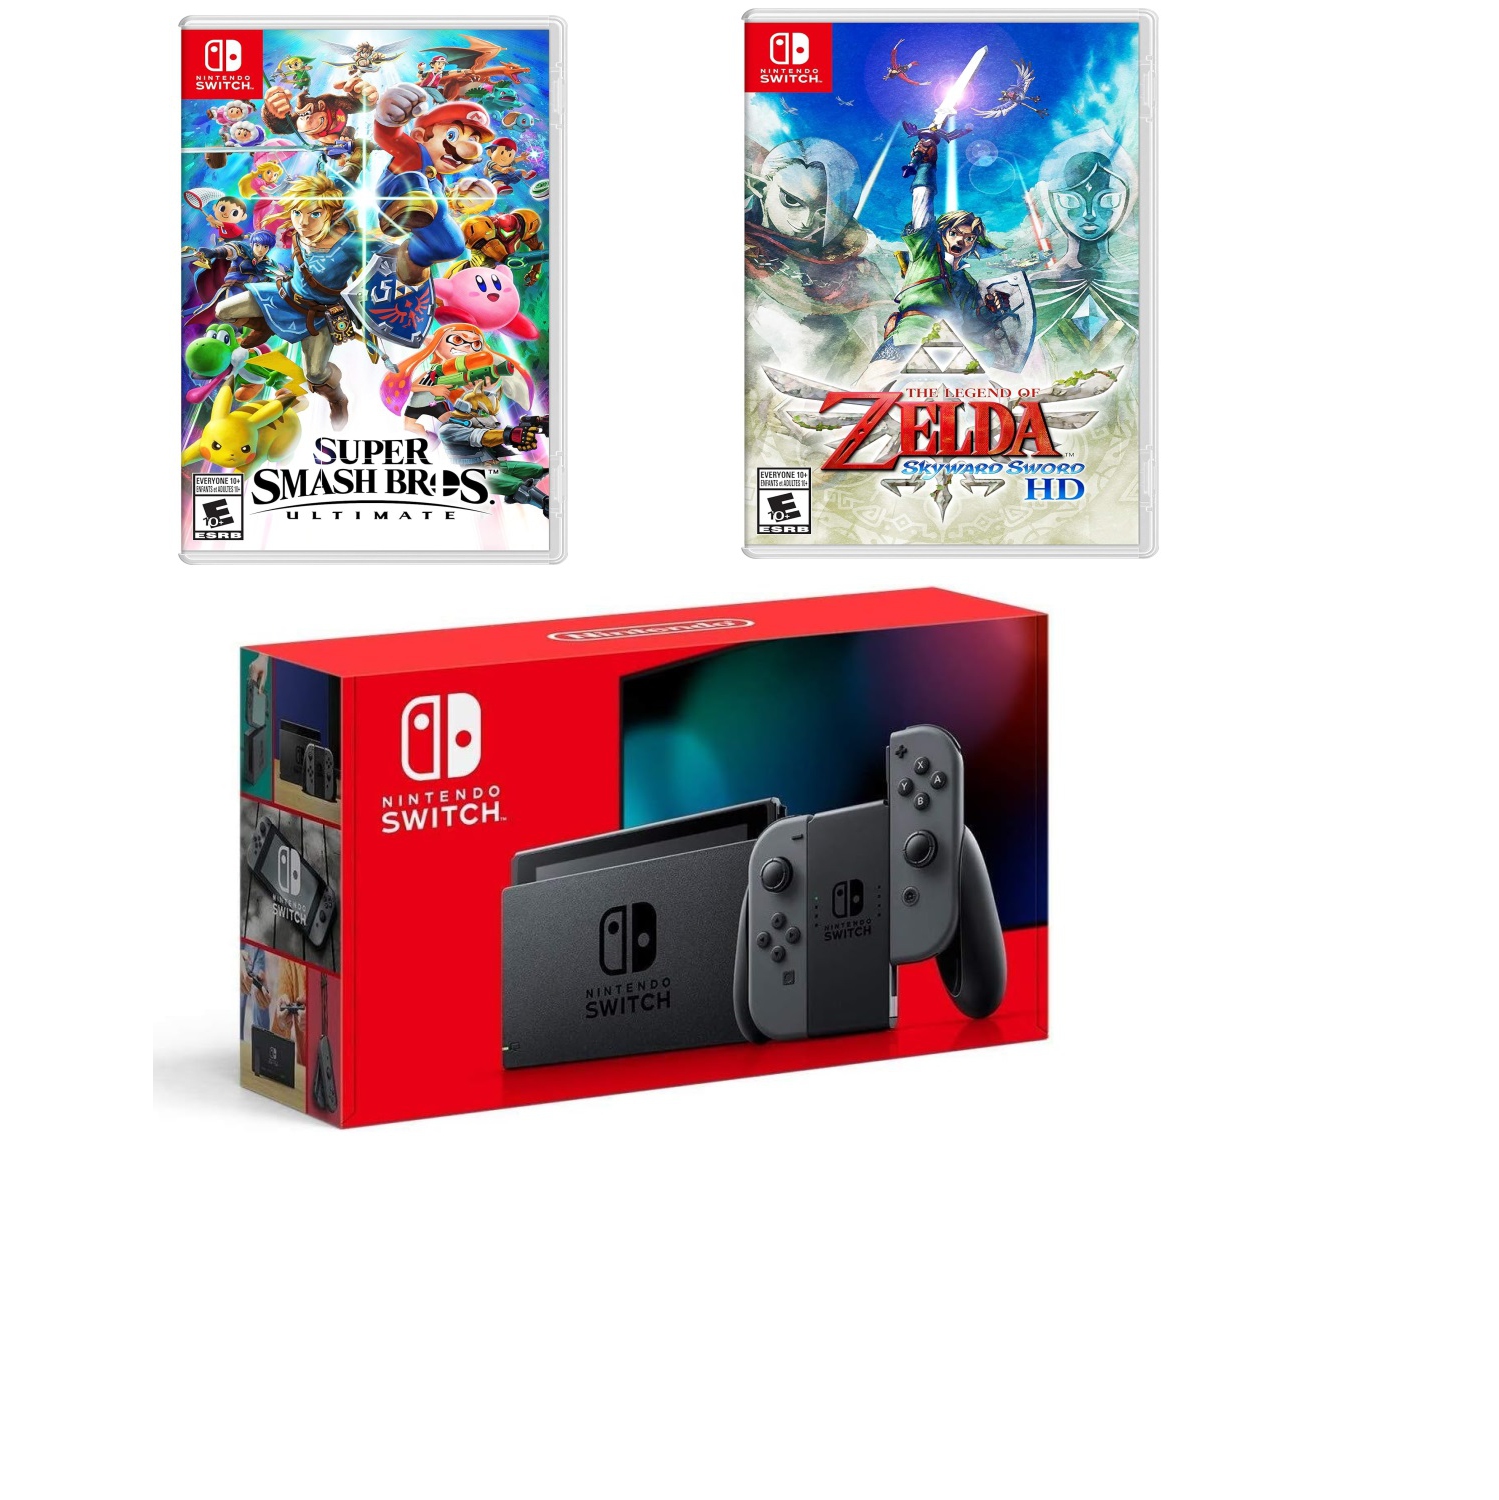 Nintendo Switch Console with Gray Joy-Con (Japan Spec) bundles with Super Smash Bros. Ultimate - Nintendo Switch Game & The Legend of Zelda Skyward Sword - Nintendo Switch Game